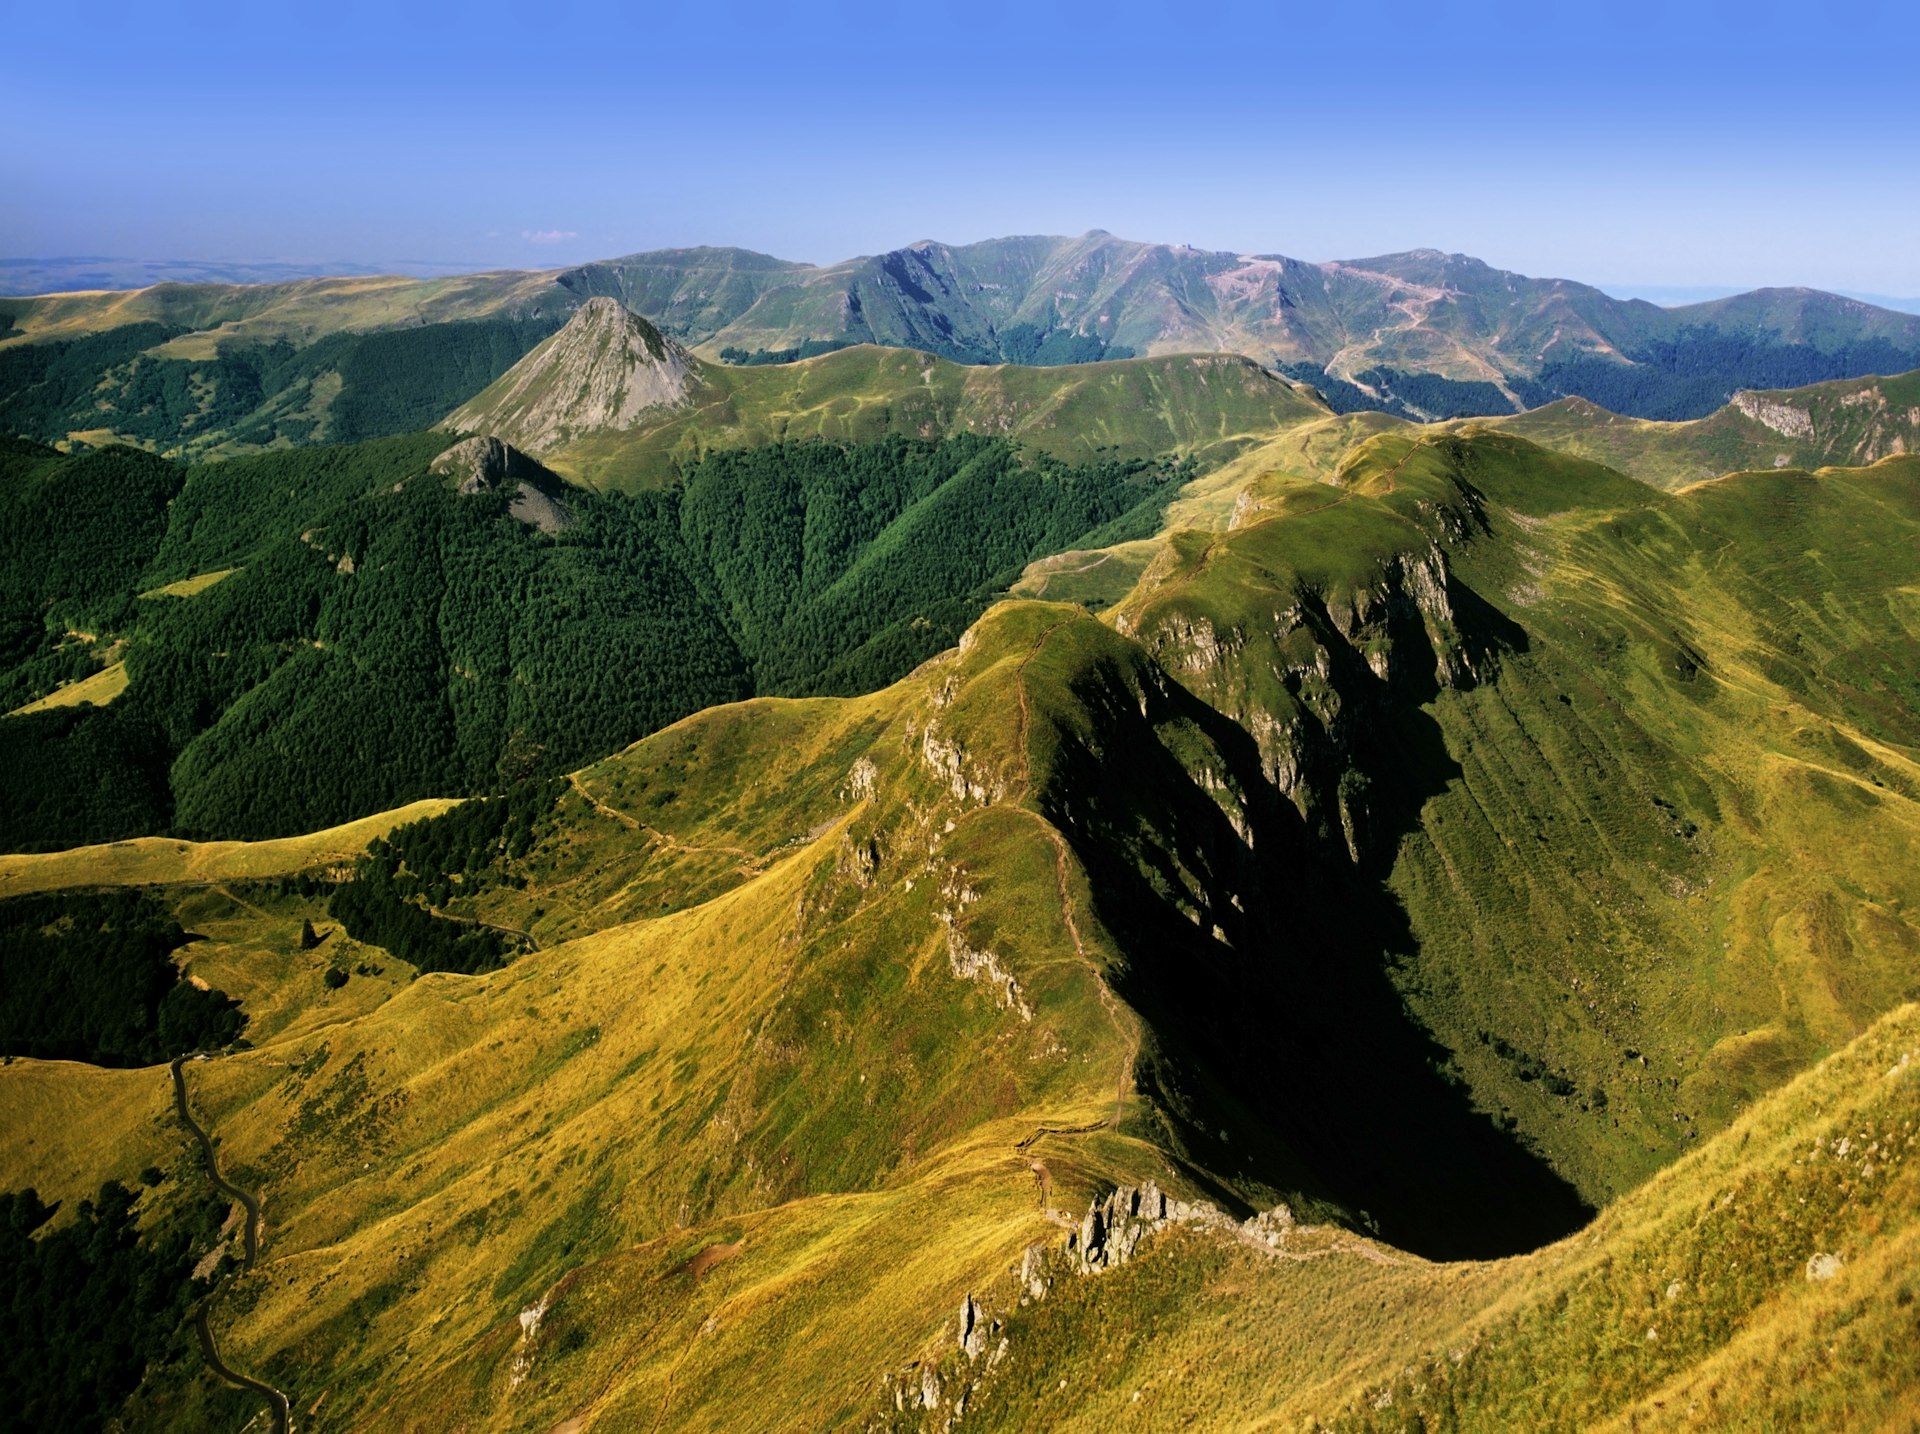 View from the summit of Puy Mary in the Parc Naturel Regional des volcans in Auvergne